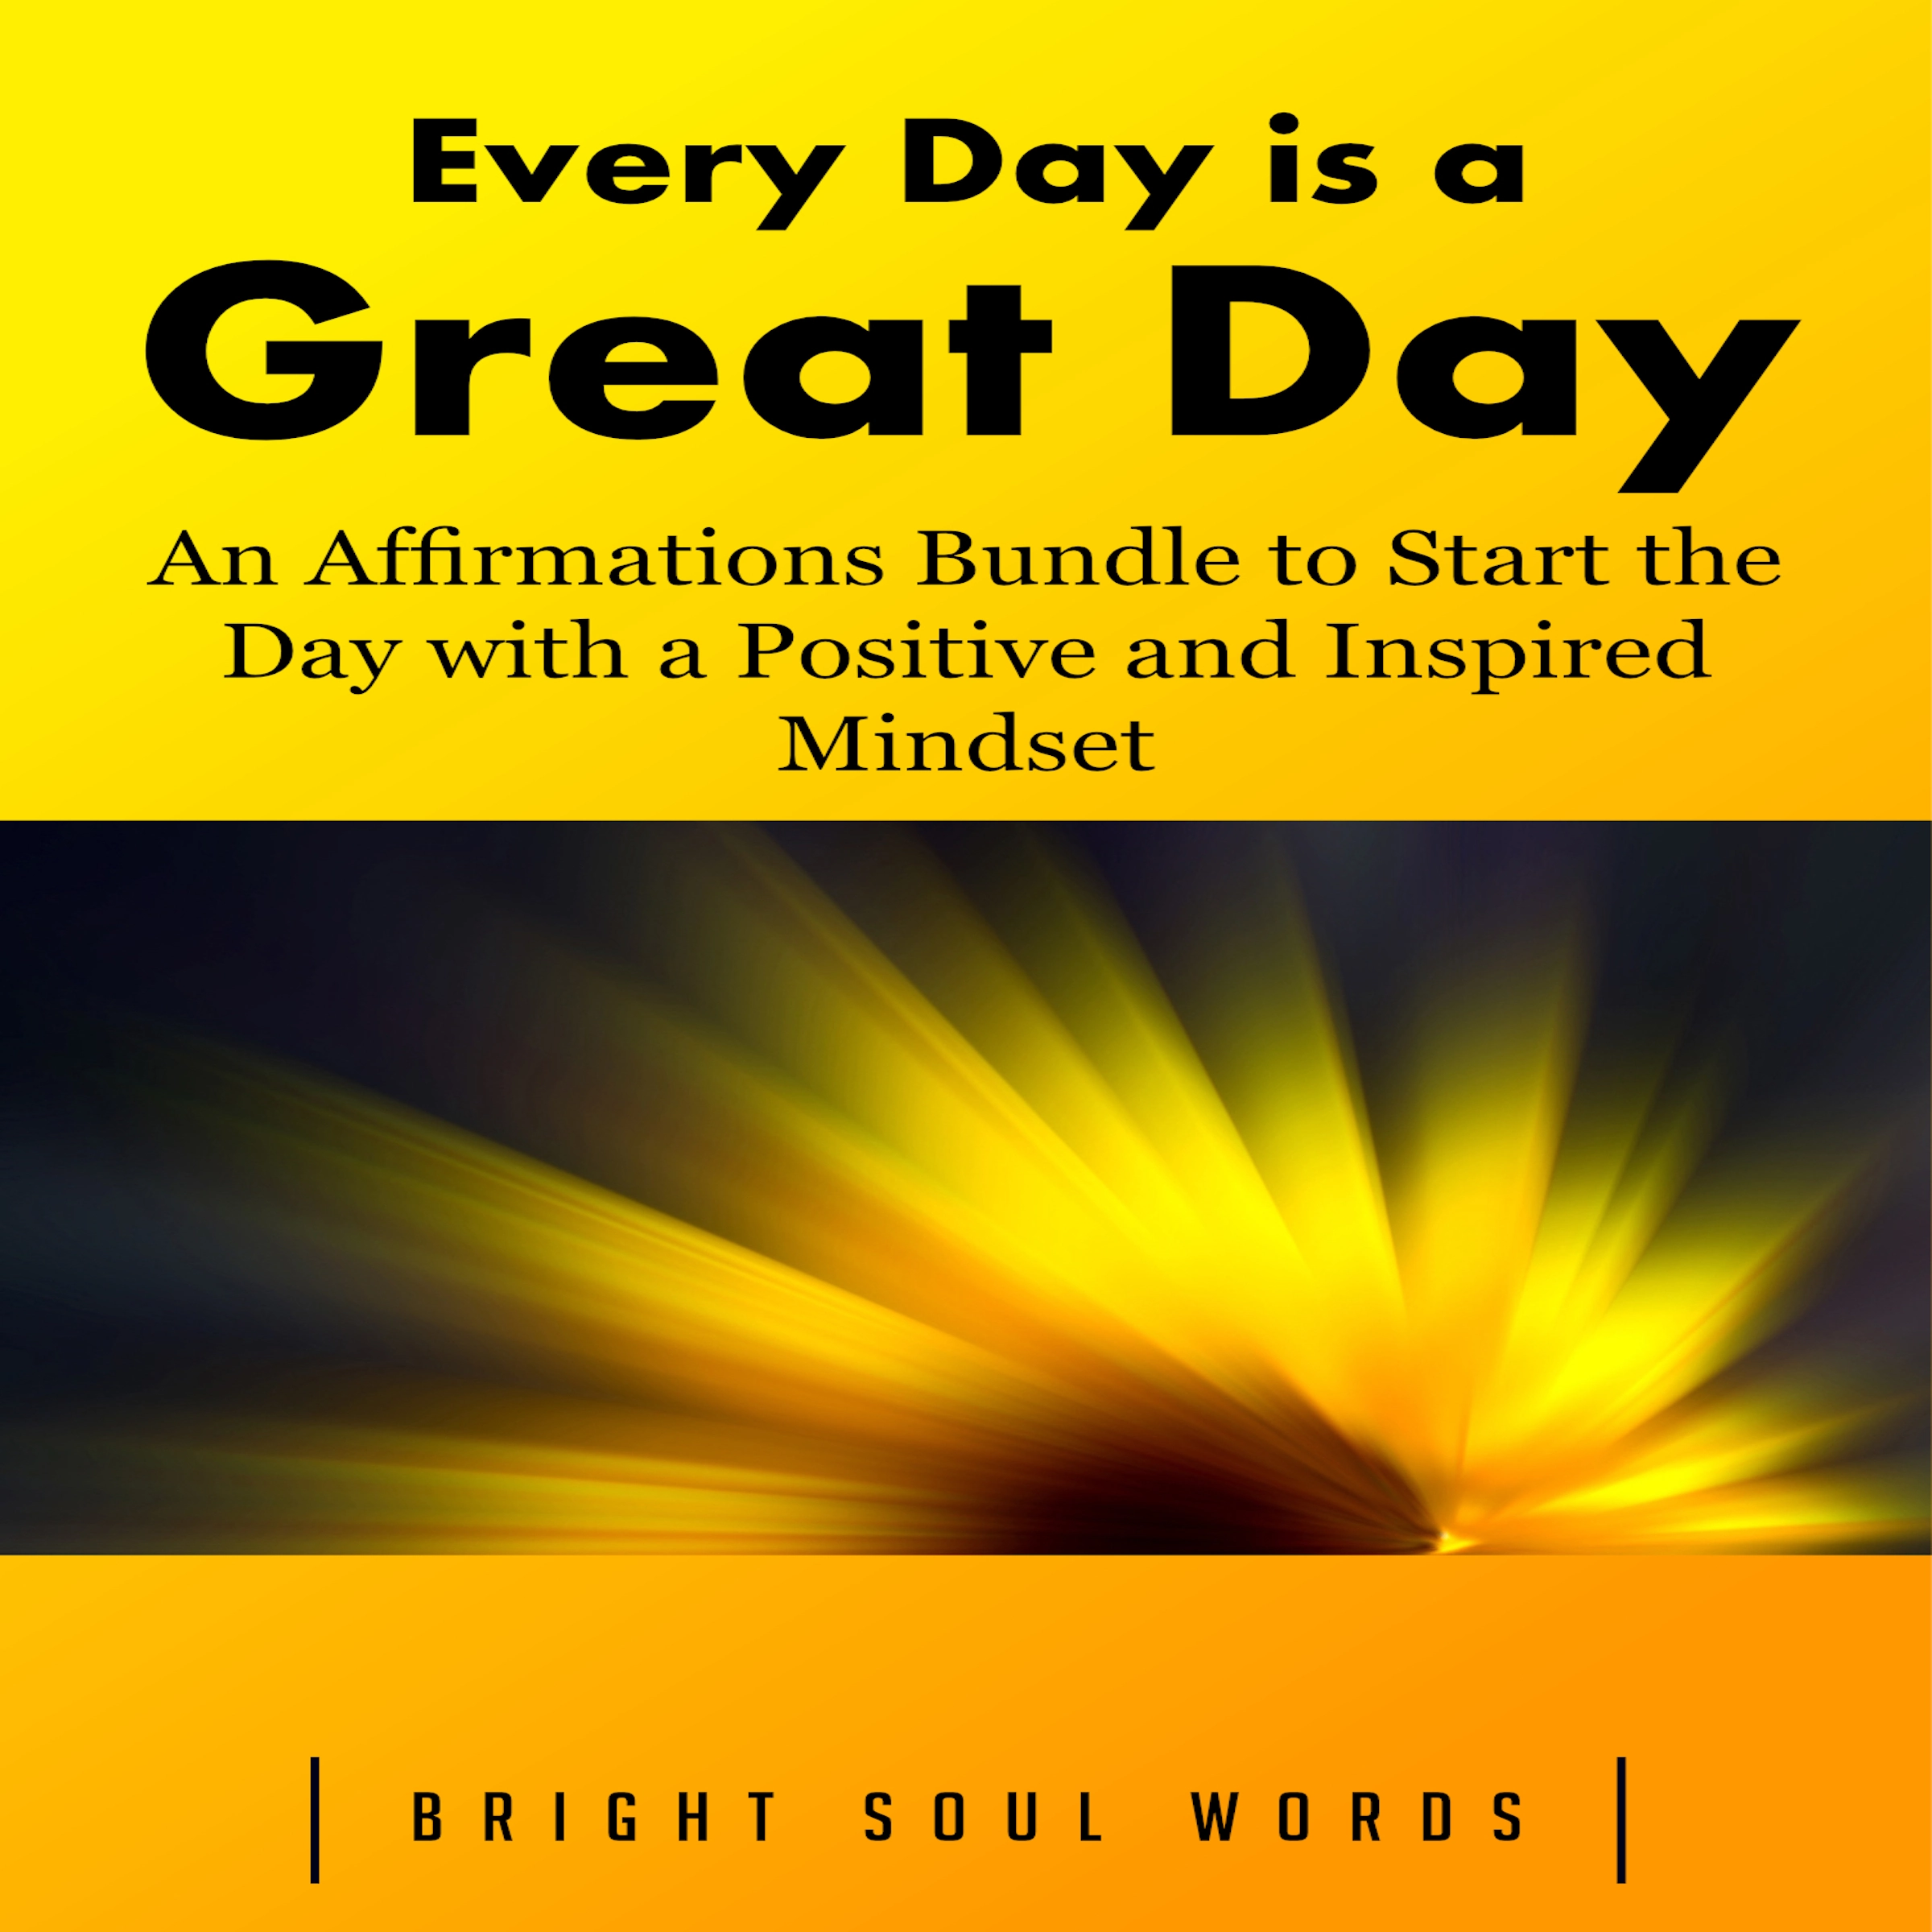 Every Day is a Great Day: An Affirmations Bundle to Start the Day with a Positive and Inspired Mindset Audiobook by Bright Soul Words